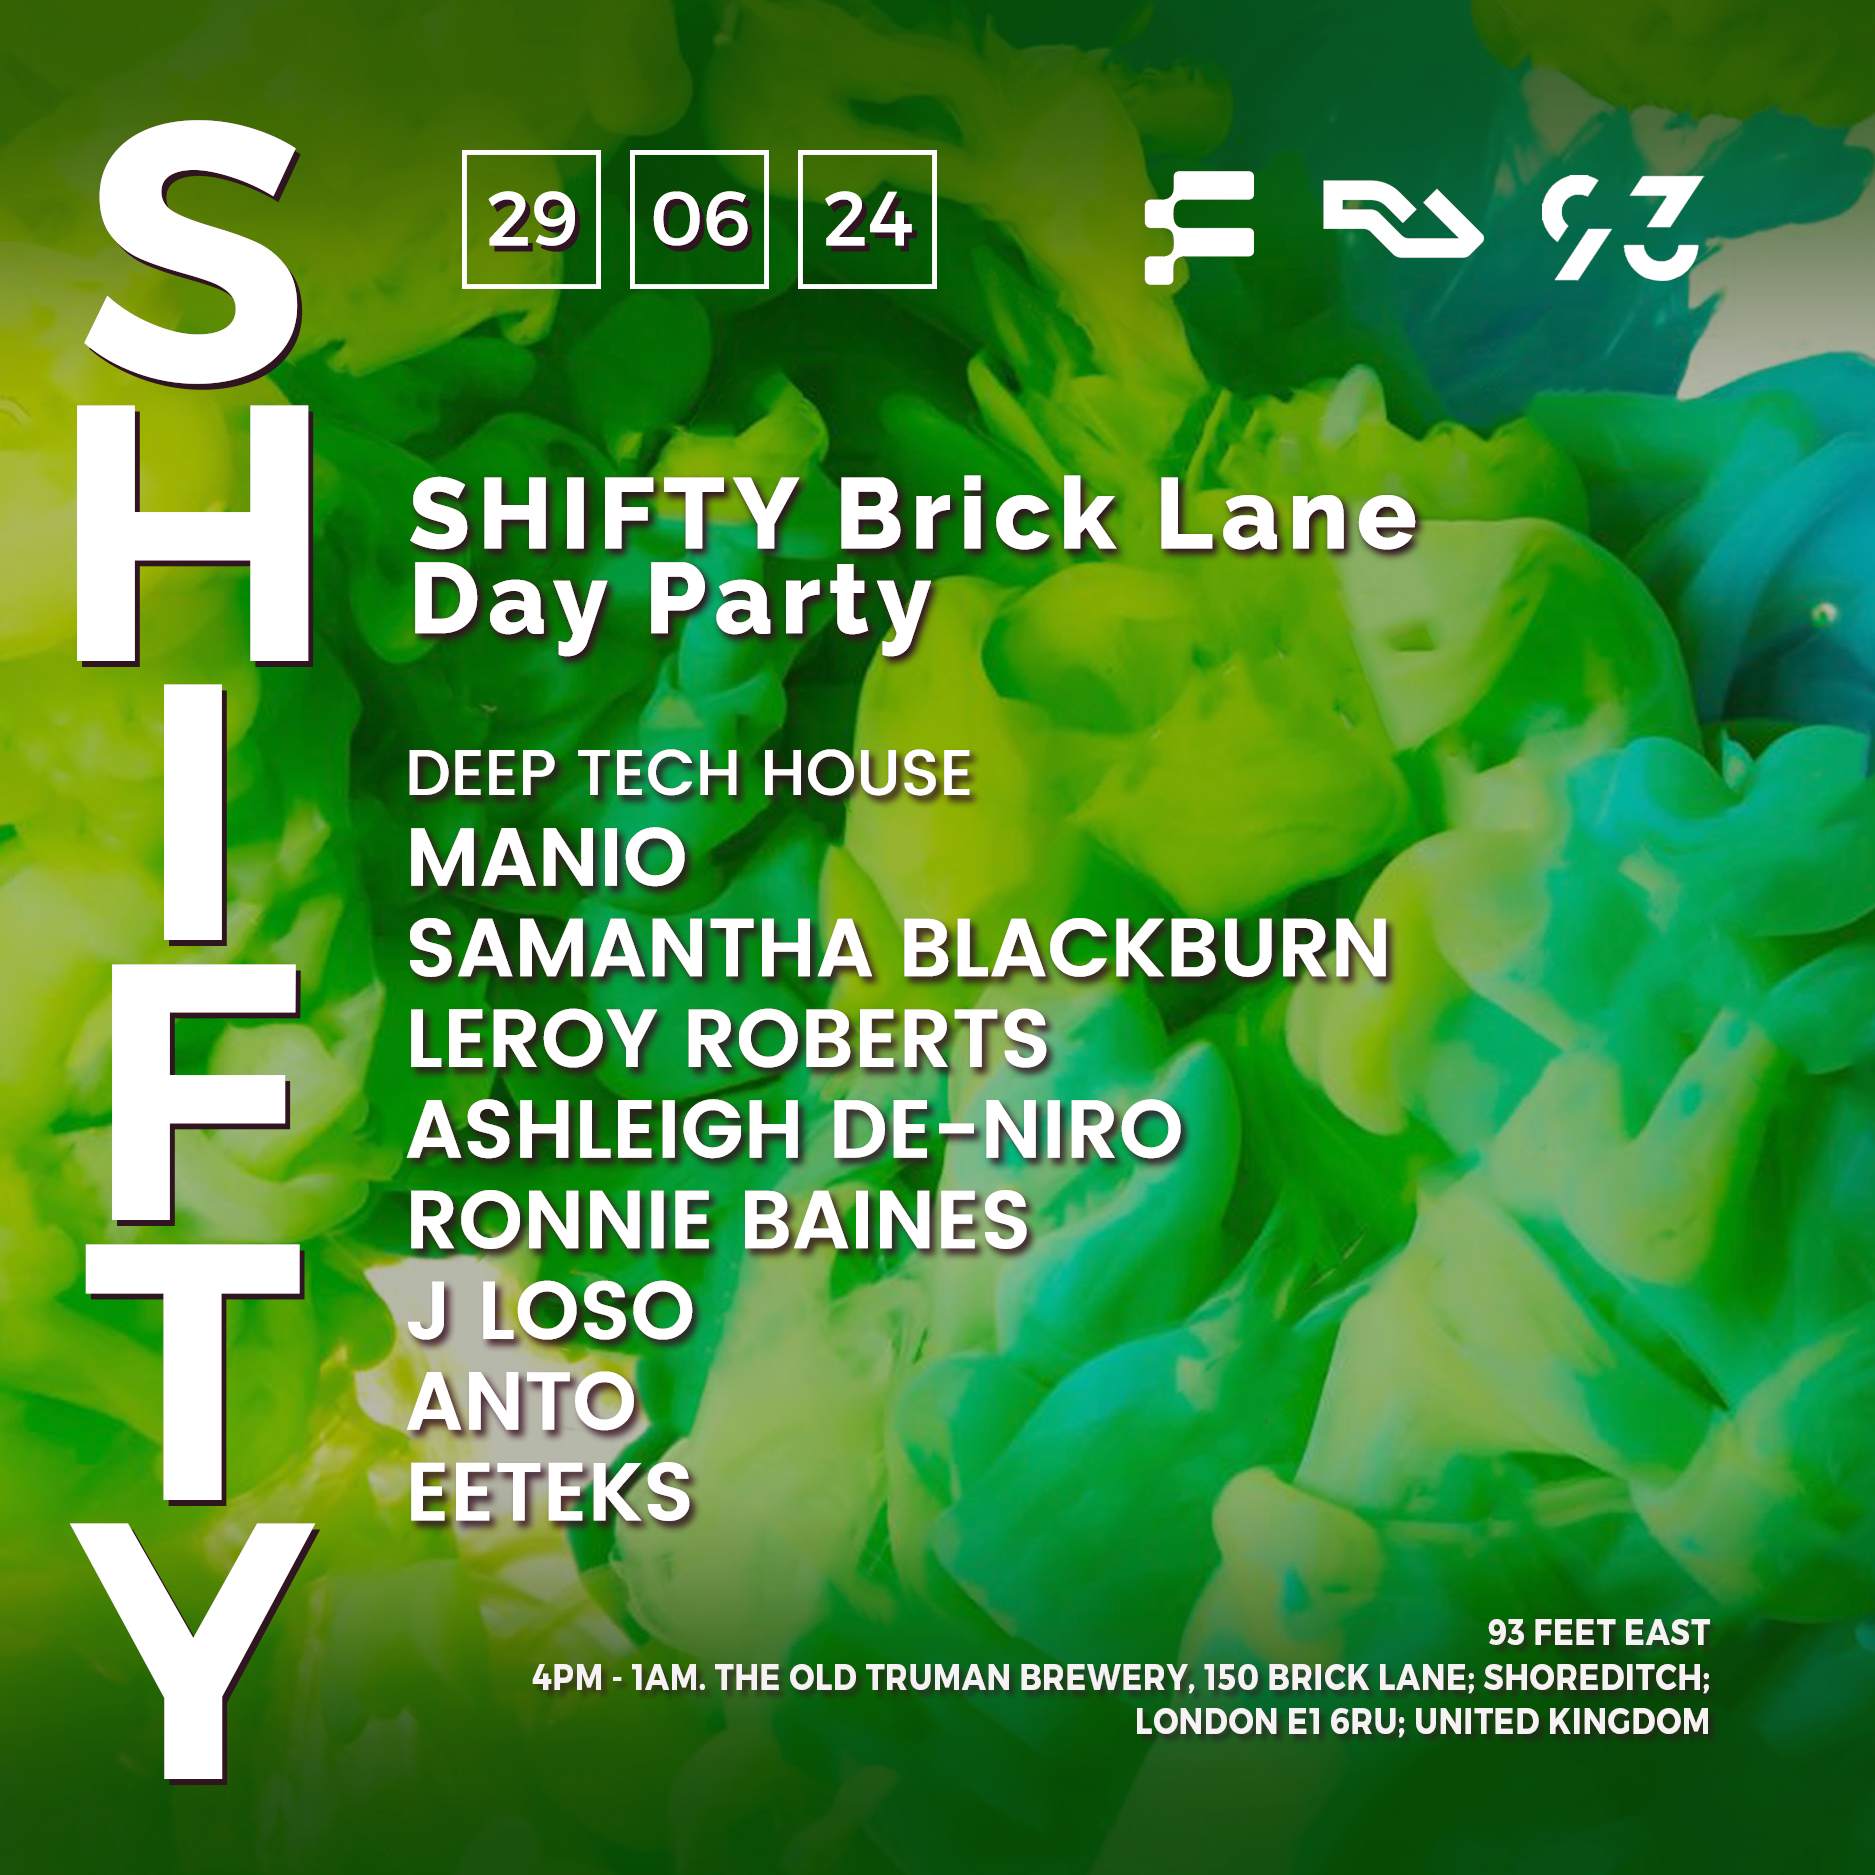 SHIFTY Brick Lane Day Party - フライヤー表